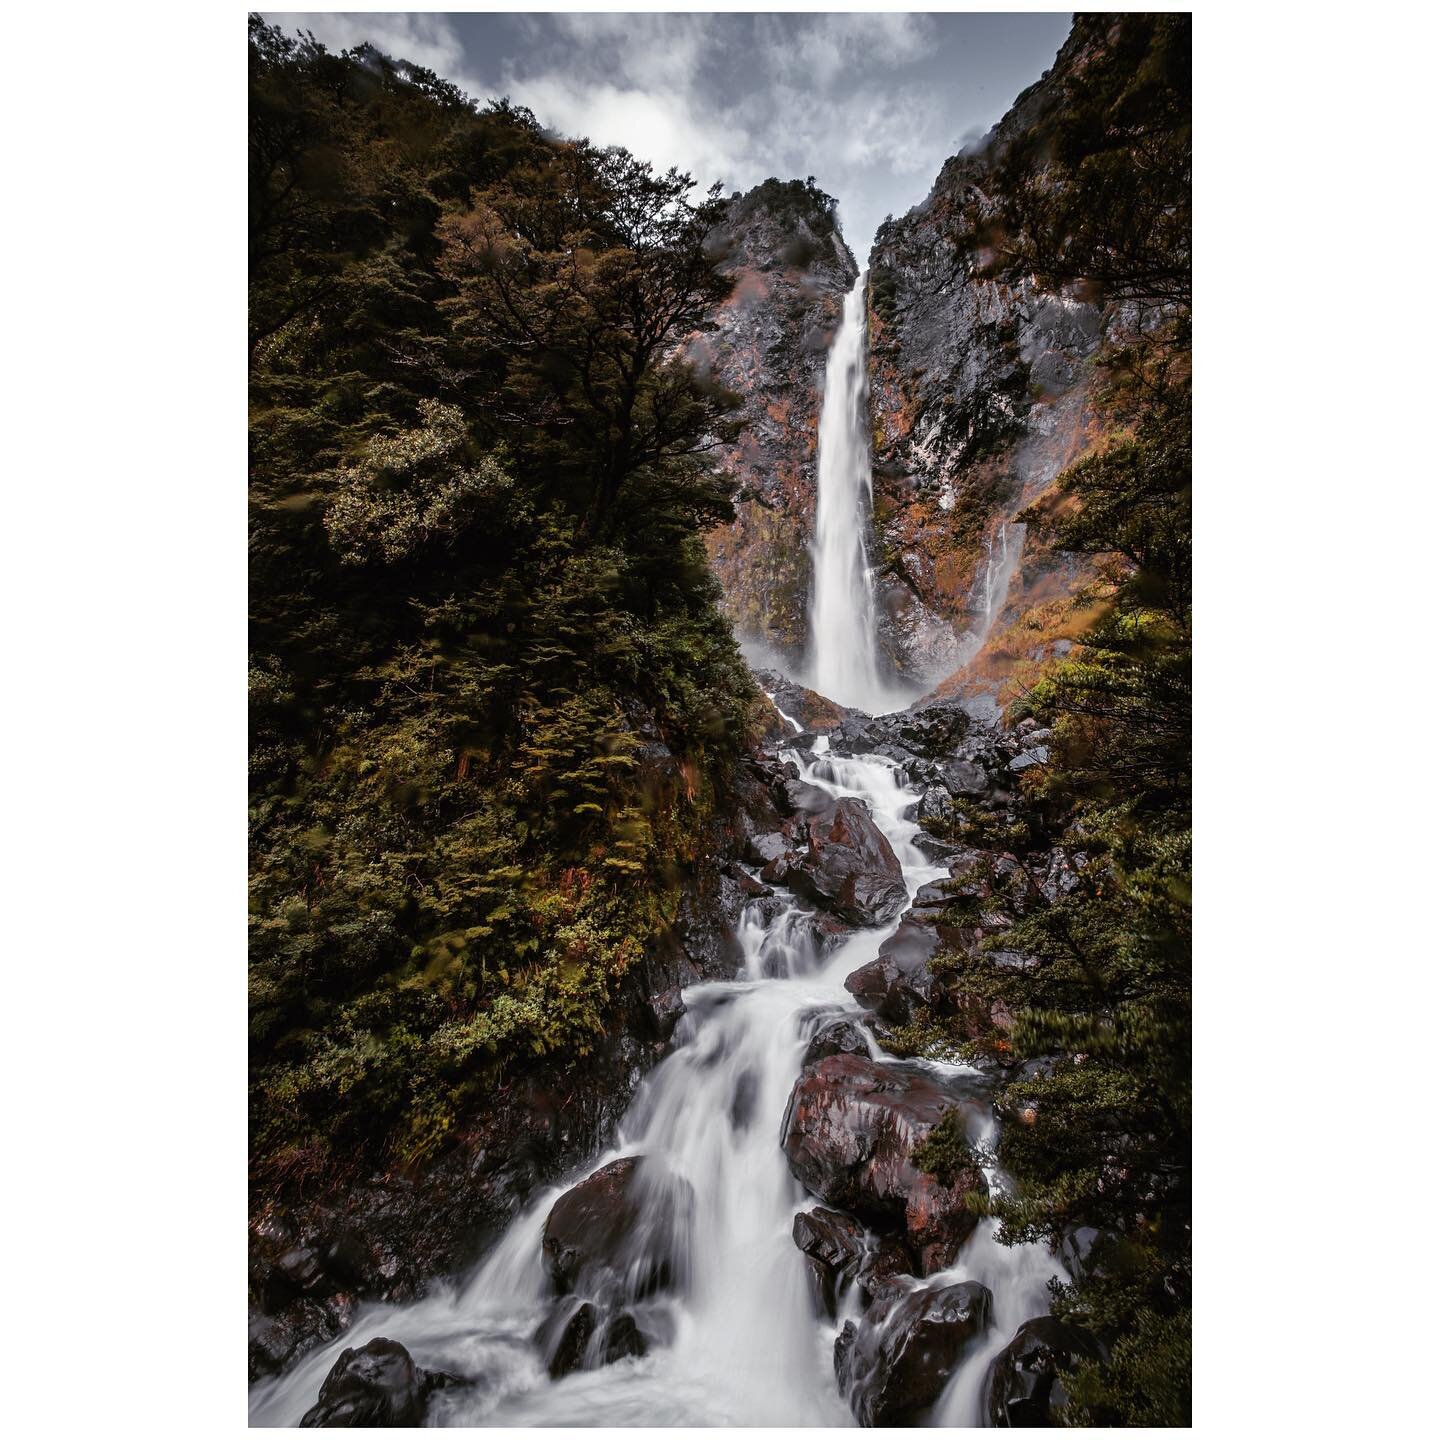 I realised today that exactly one year ago we were in Arthur&rsquo;s pass on the start of a South Island trip. Here&rsquo;s a photo from Devil&rsquo;s Punchbowl; a beautiful waterfall a short walk from Arthur&rsquo;s pass village. 

#waterfall #newze